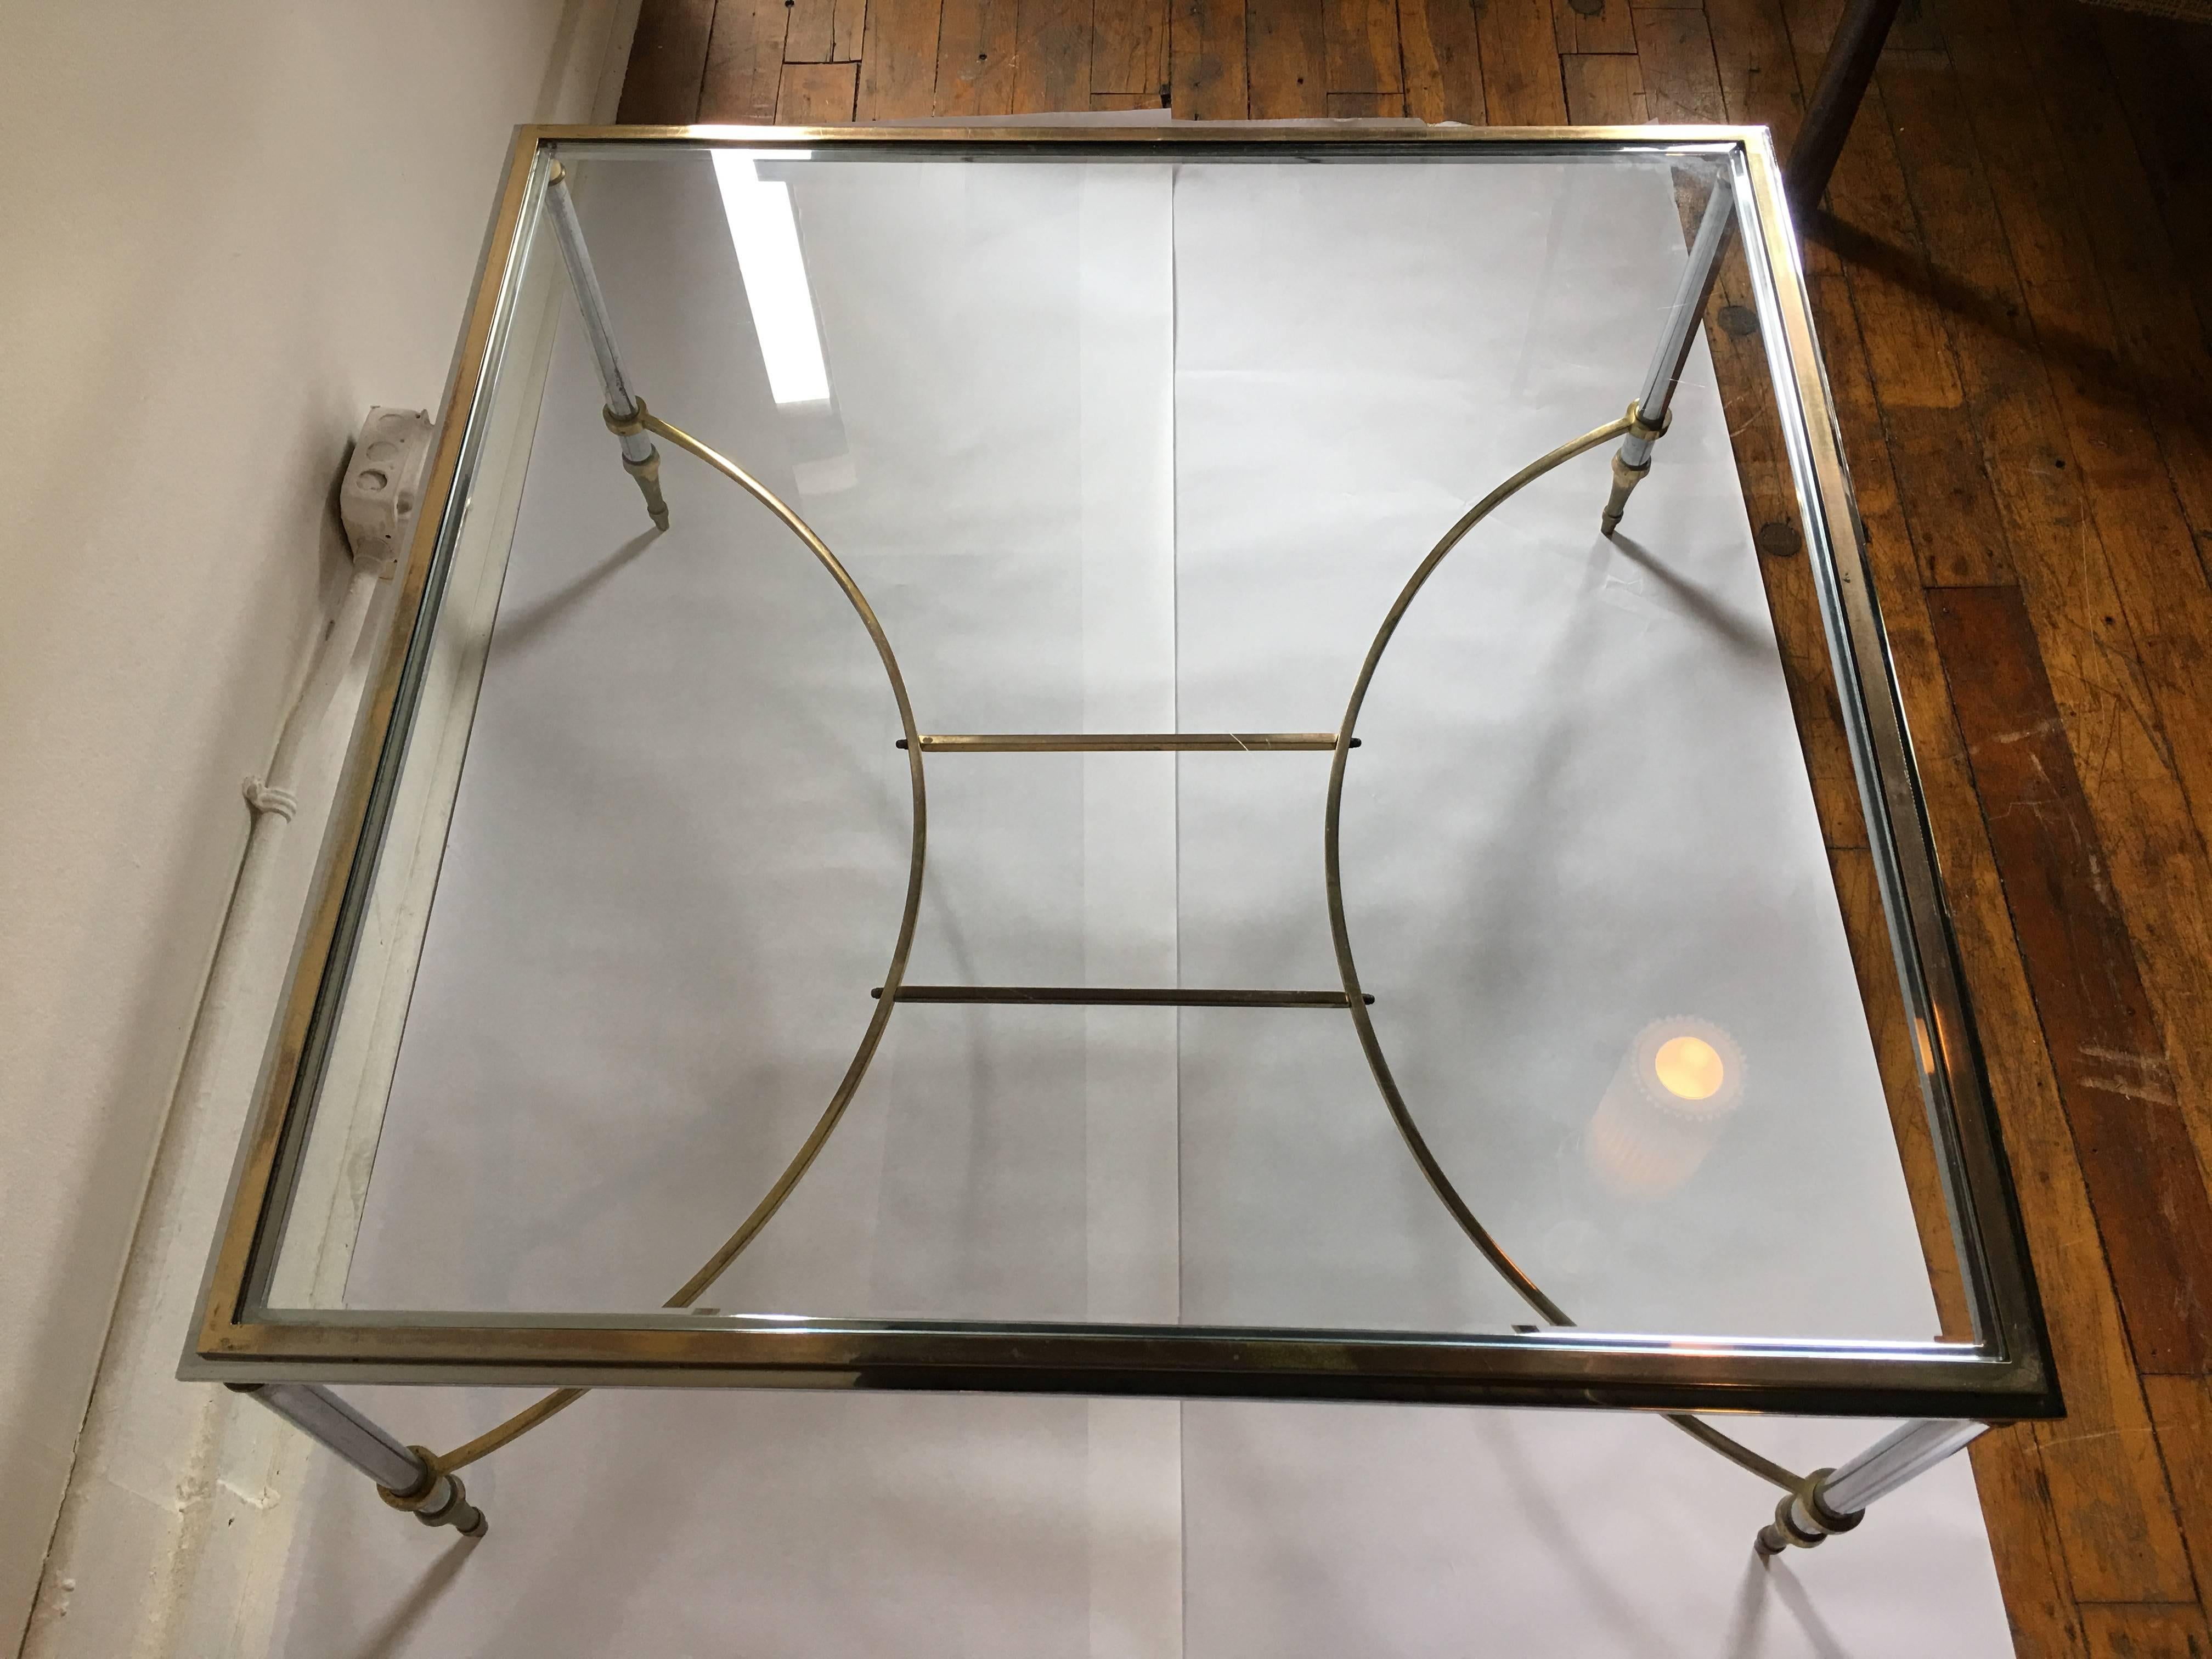 Large Mid-Century Modern beveled glass-top cocktail table in the style of Maison Jansen.  Brass and polished steel chrome square metal frame features curved stretcher base with decorative Regency-style details.  Made in Spain.